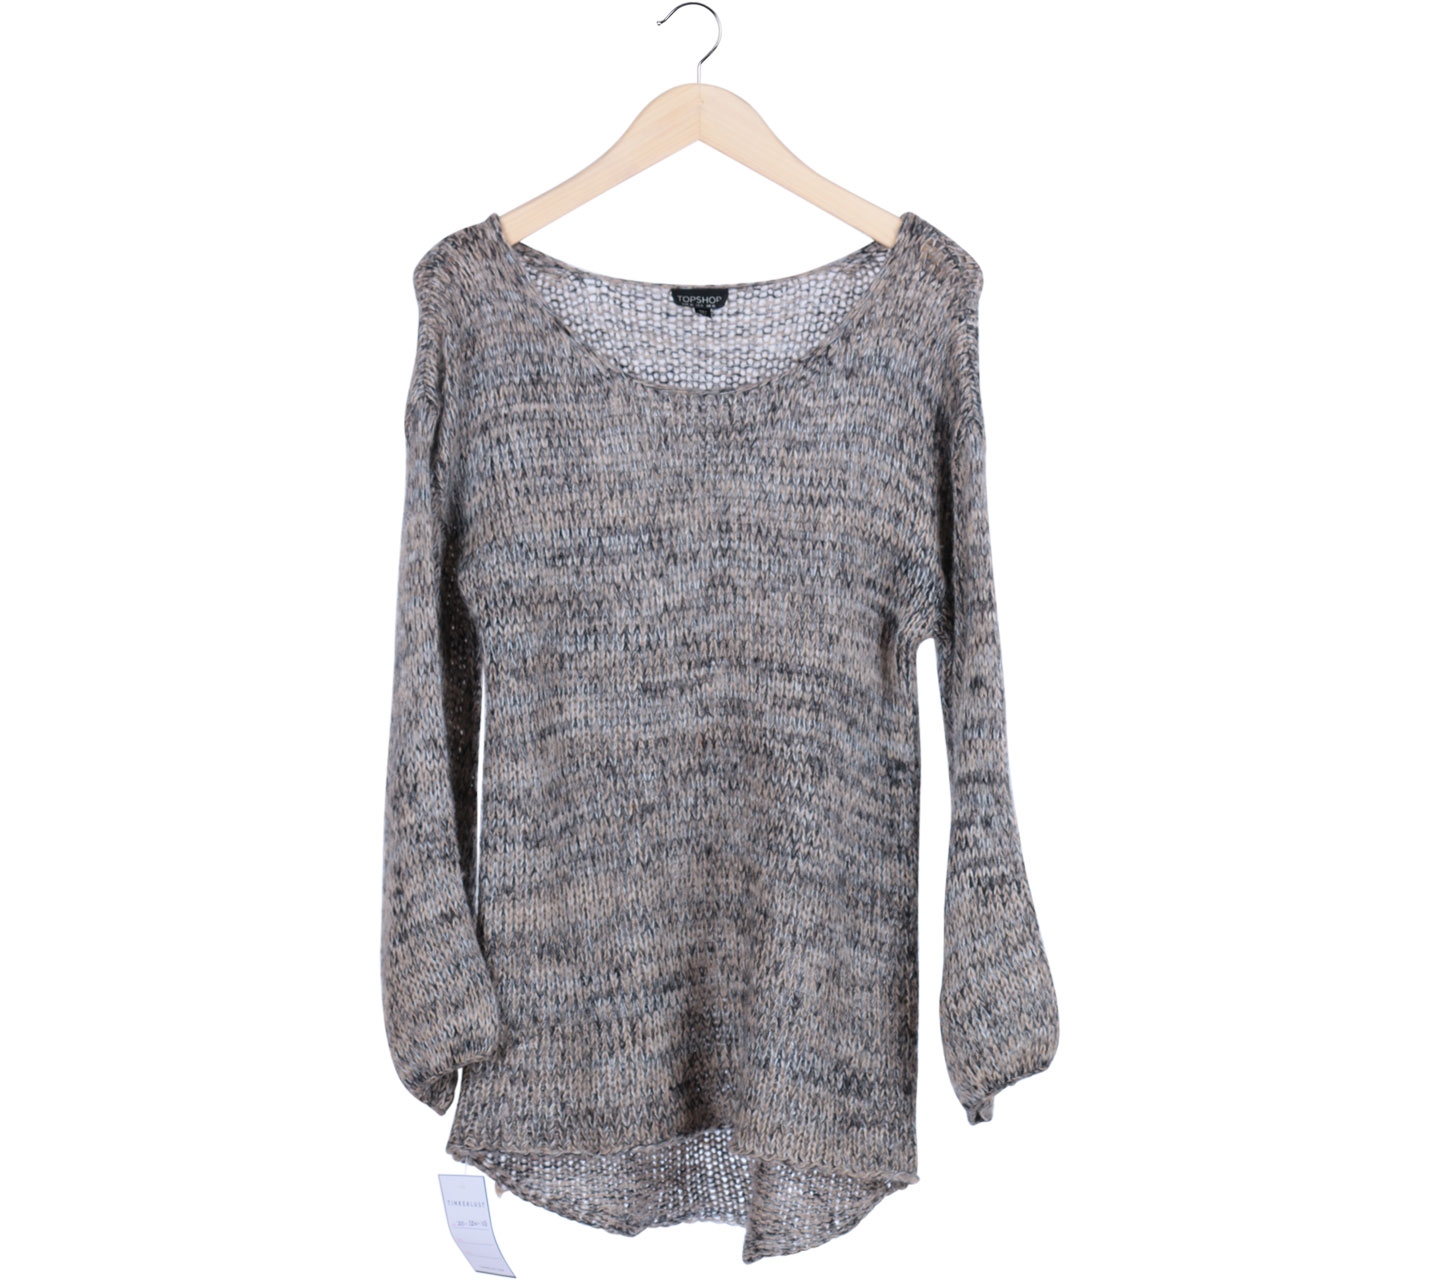 Topshop Brown Knitted Sweater